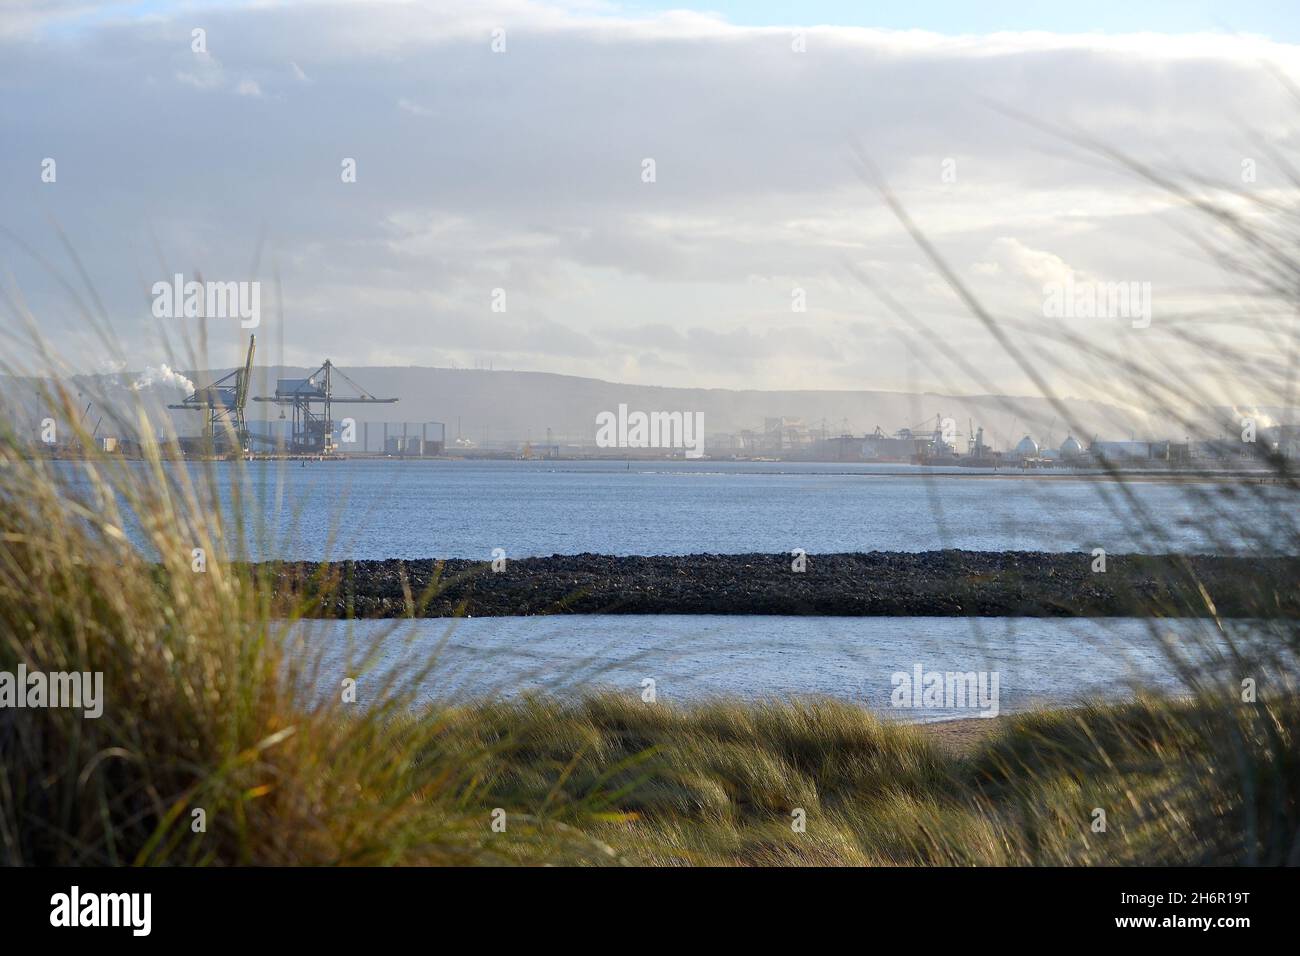 Colour image showing the cranes at PD Port's, Teesside Freeport site on the south bank of the River Tees in the Tees Estuary, North-east England UK. Stock Photo